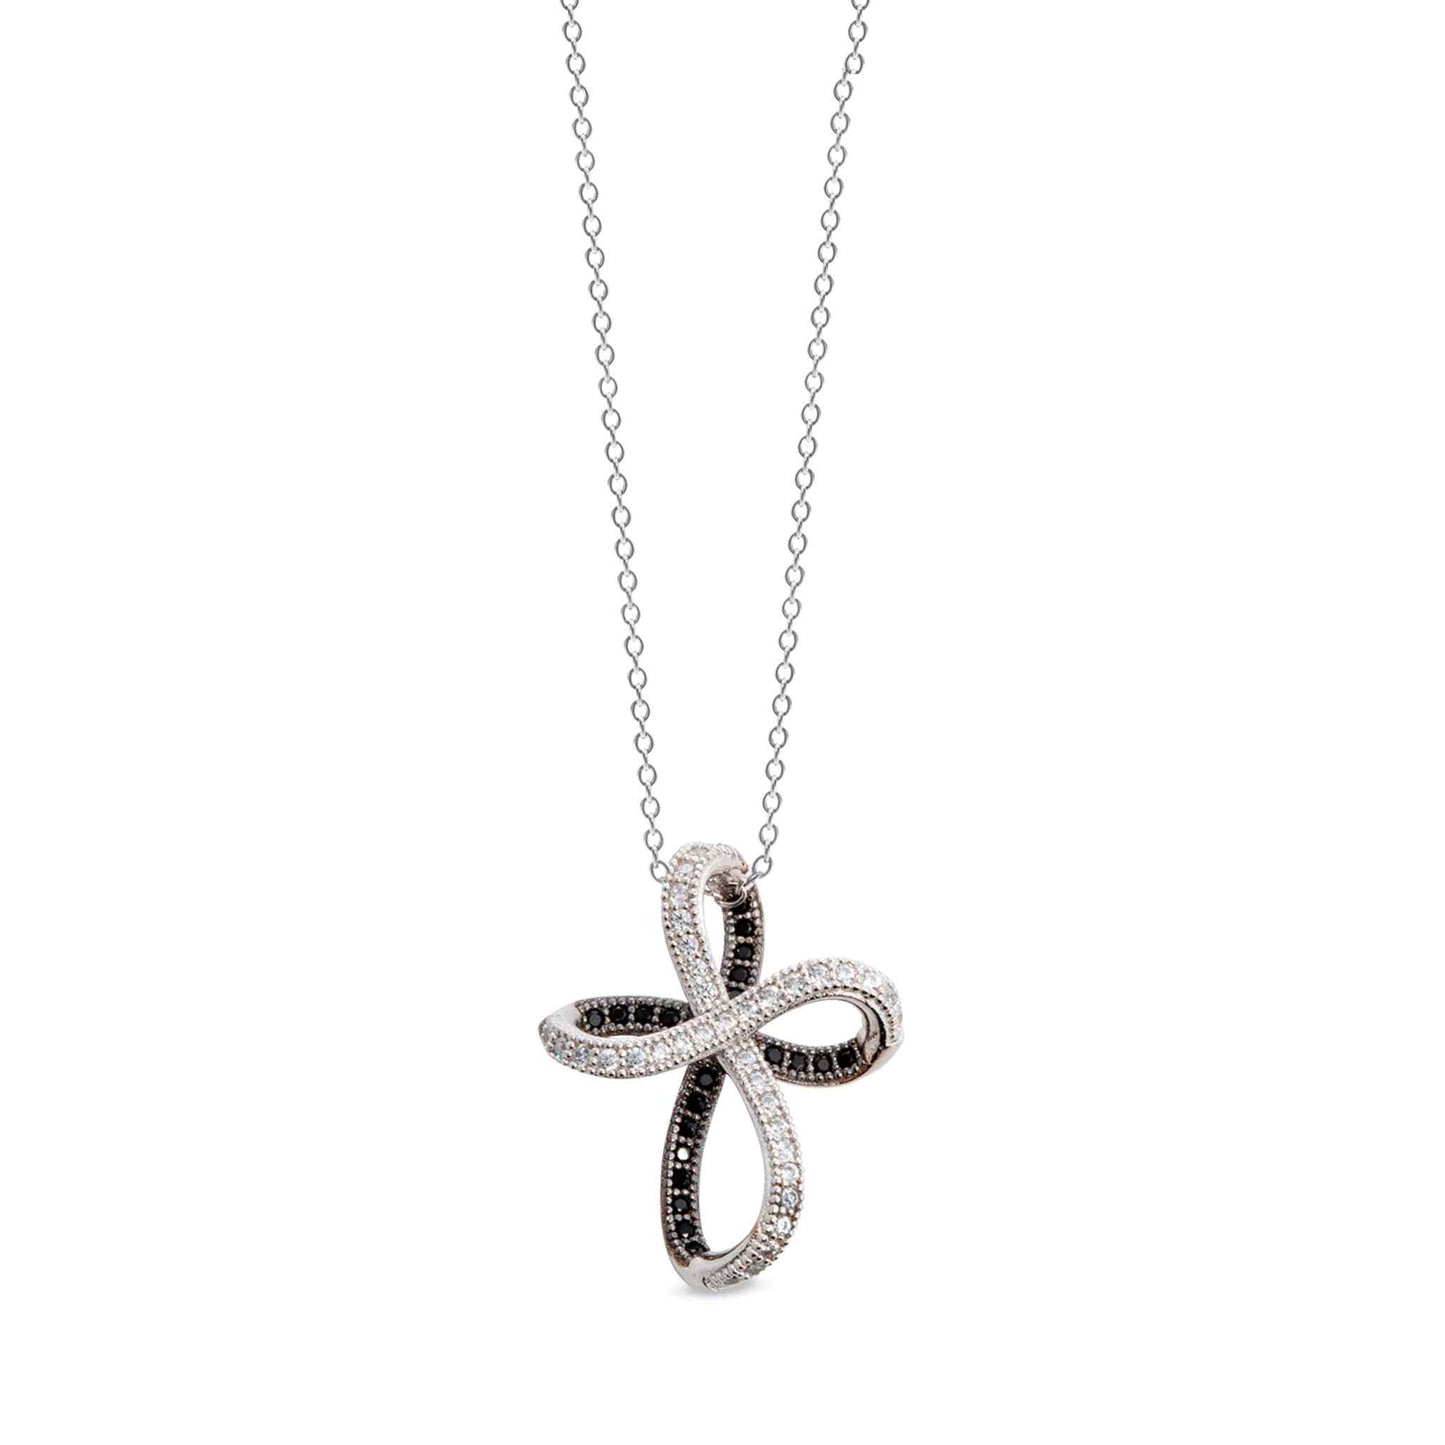 A black & silver ribbon cross necklace with simulated diamonds displayed on a neutral white background.